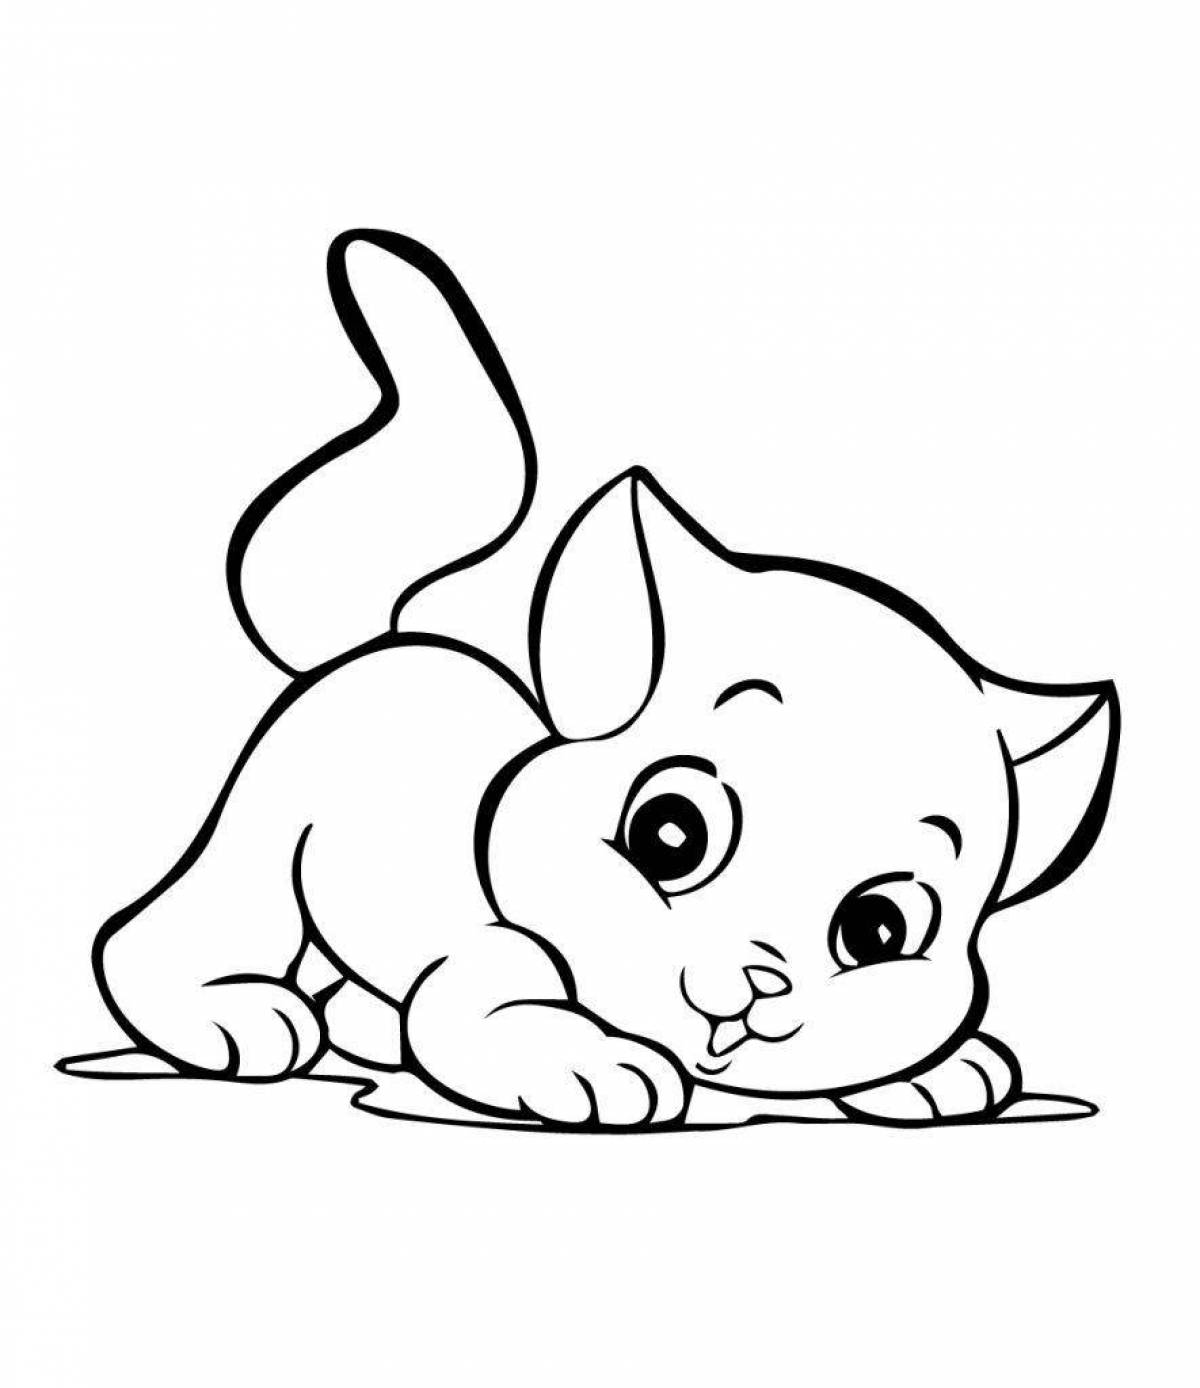 Adorable coloring pages kittens with dogs for children 3 4 years old